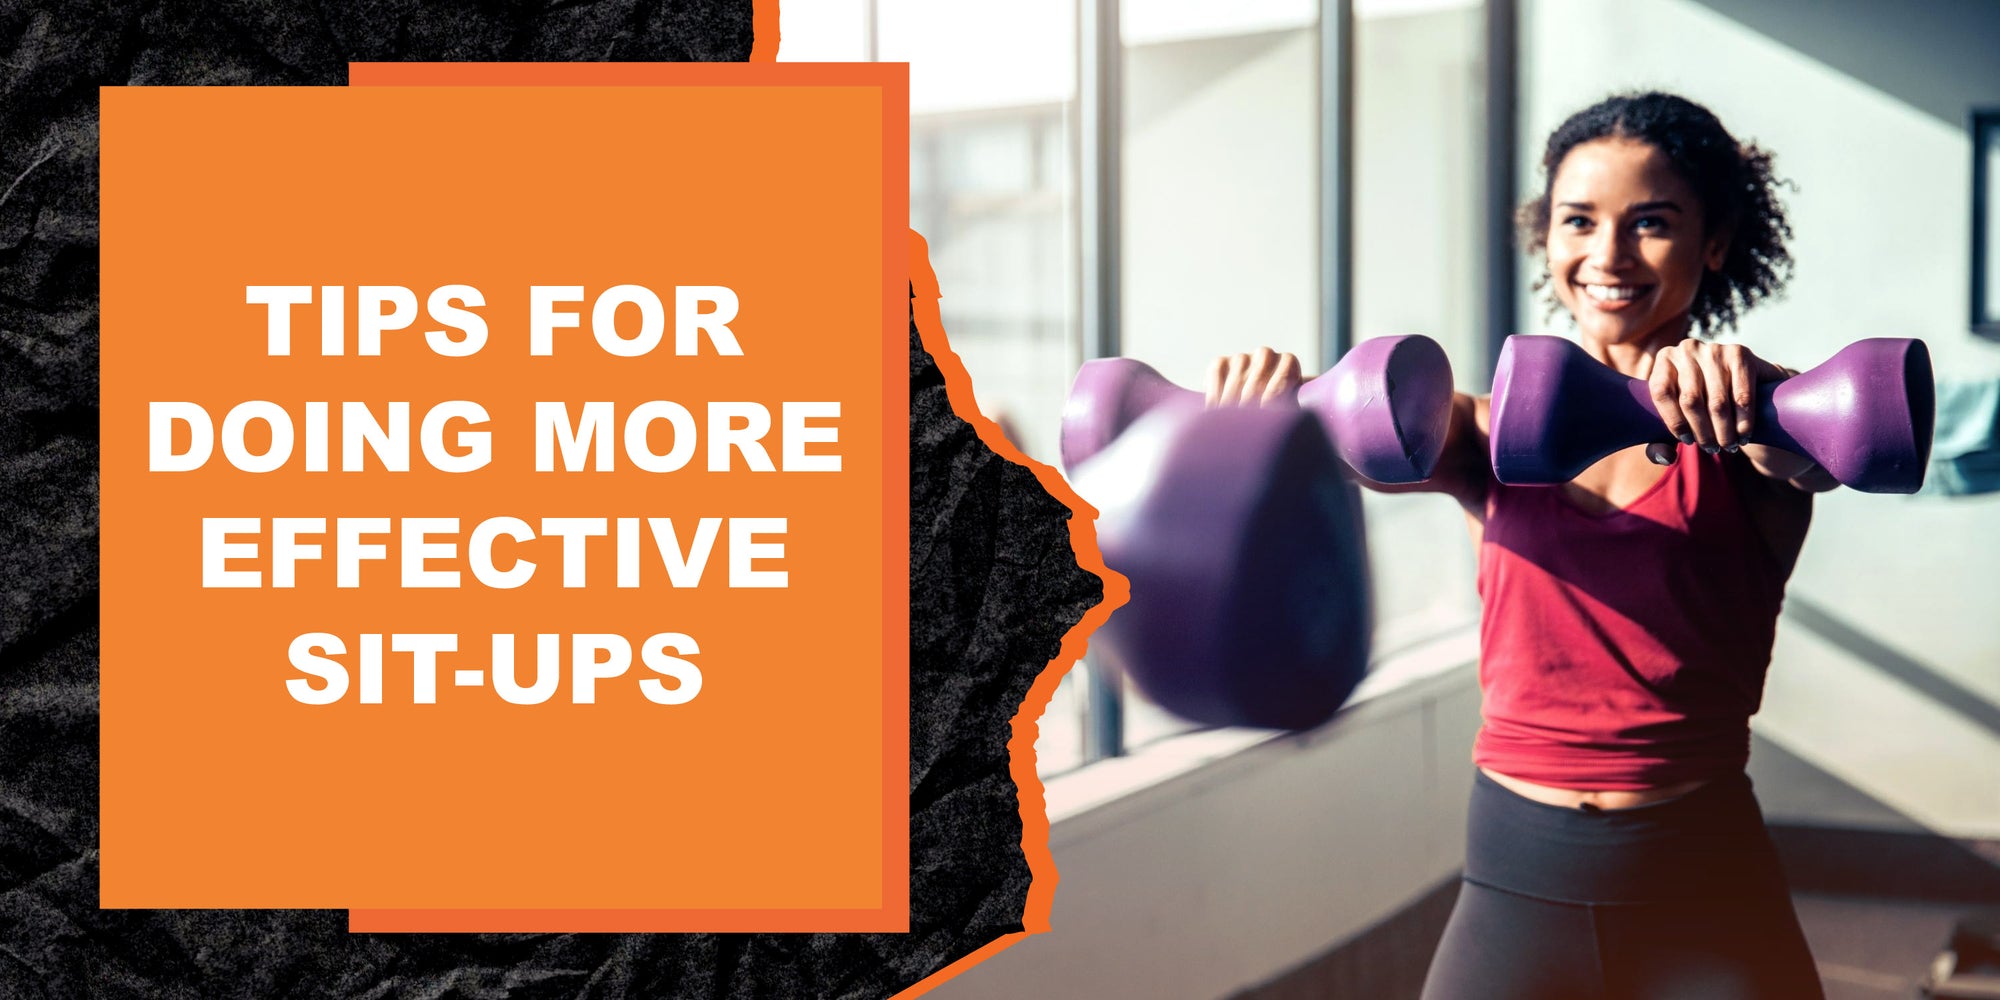 Tips for Doing More Effective Sit-Ups